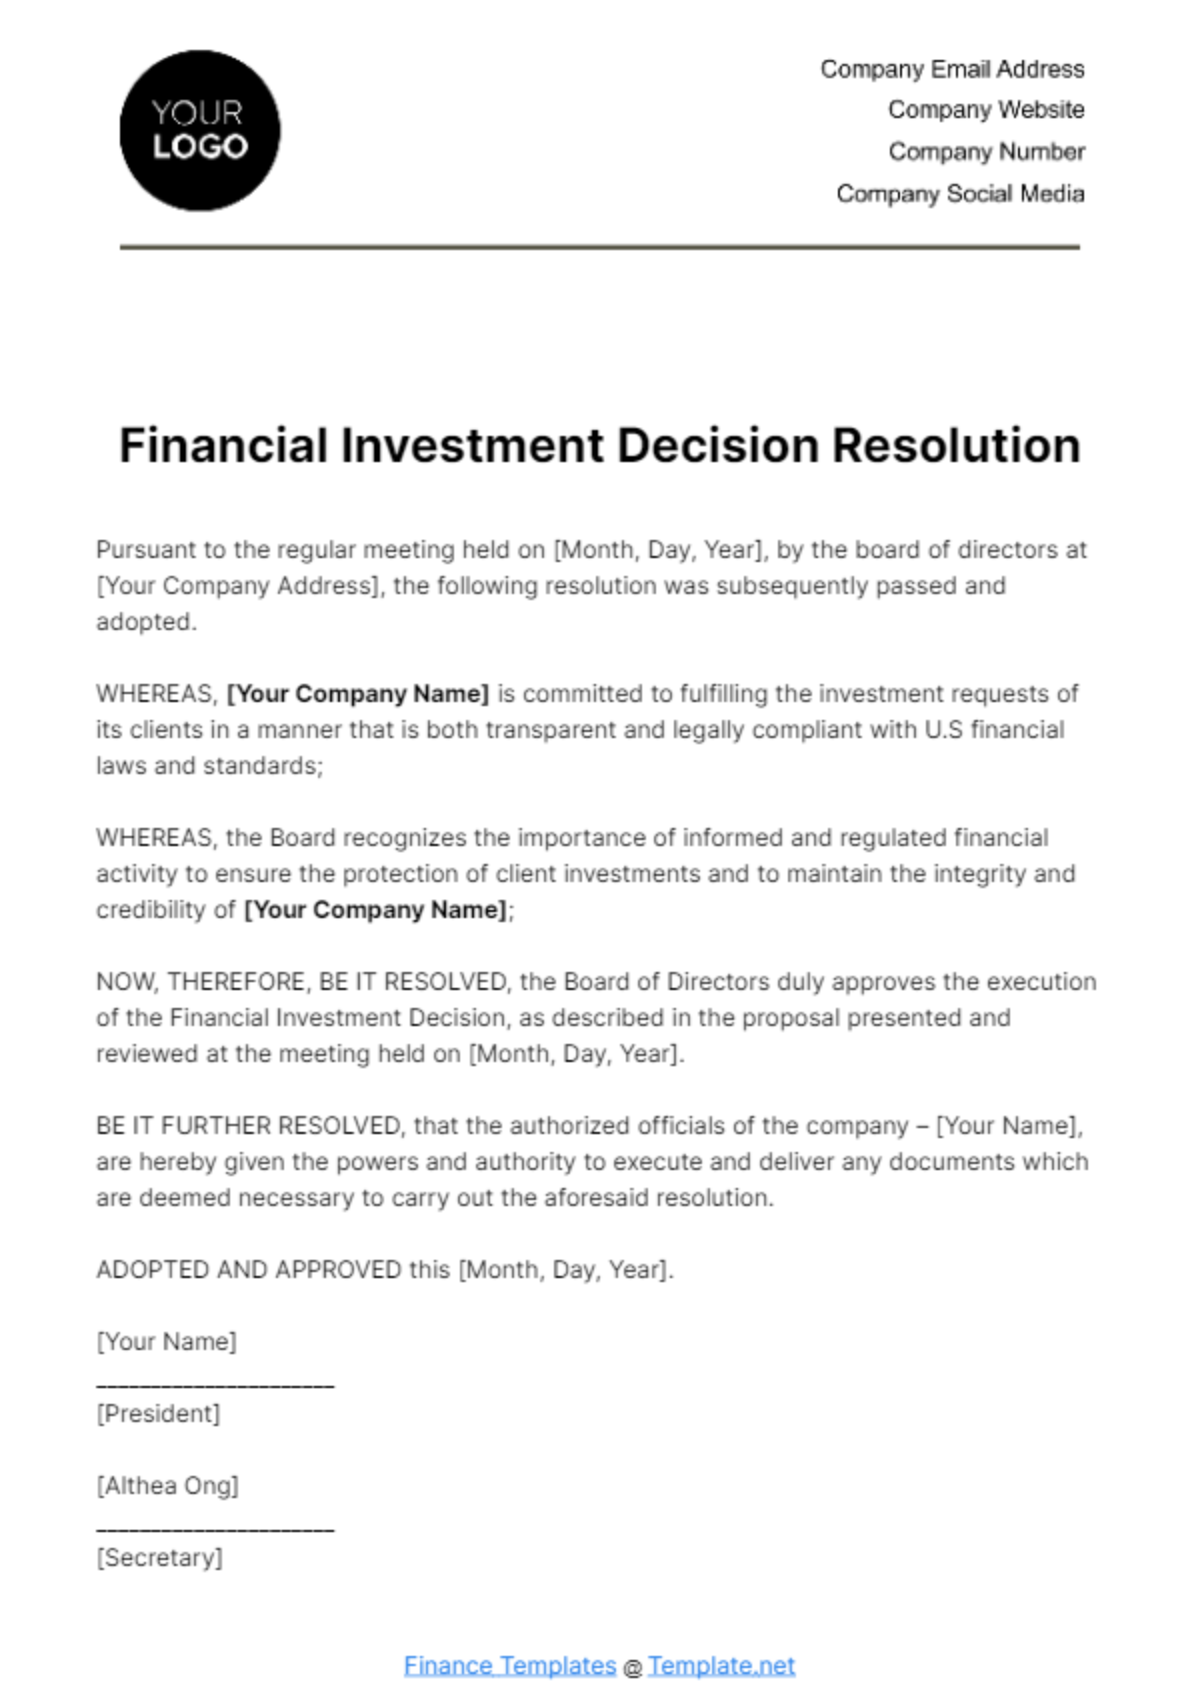 Financial Investment Decision Resolution Template